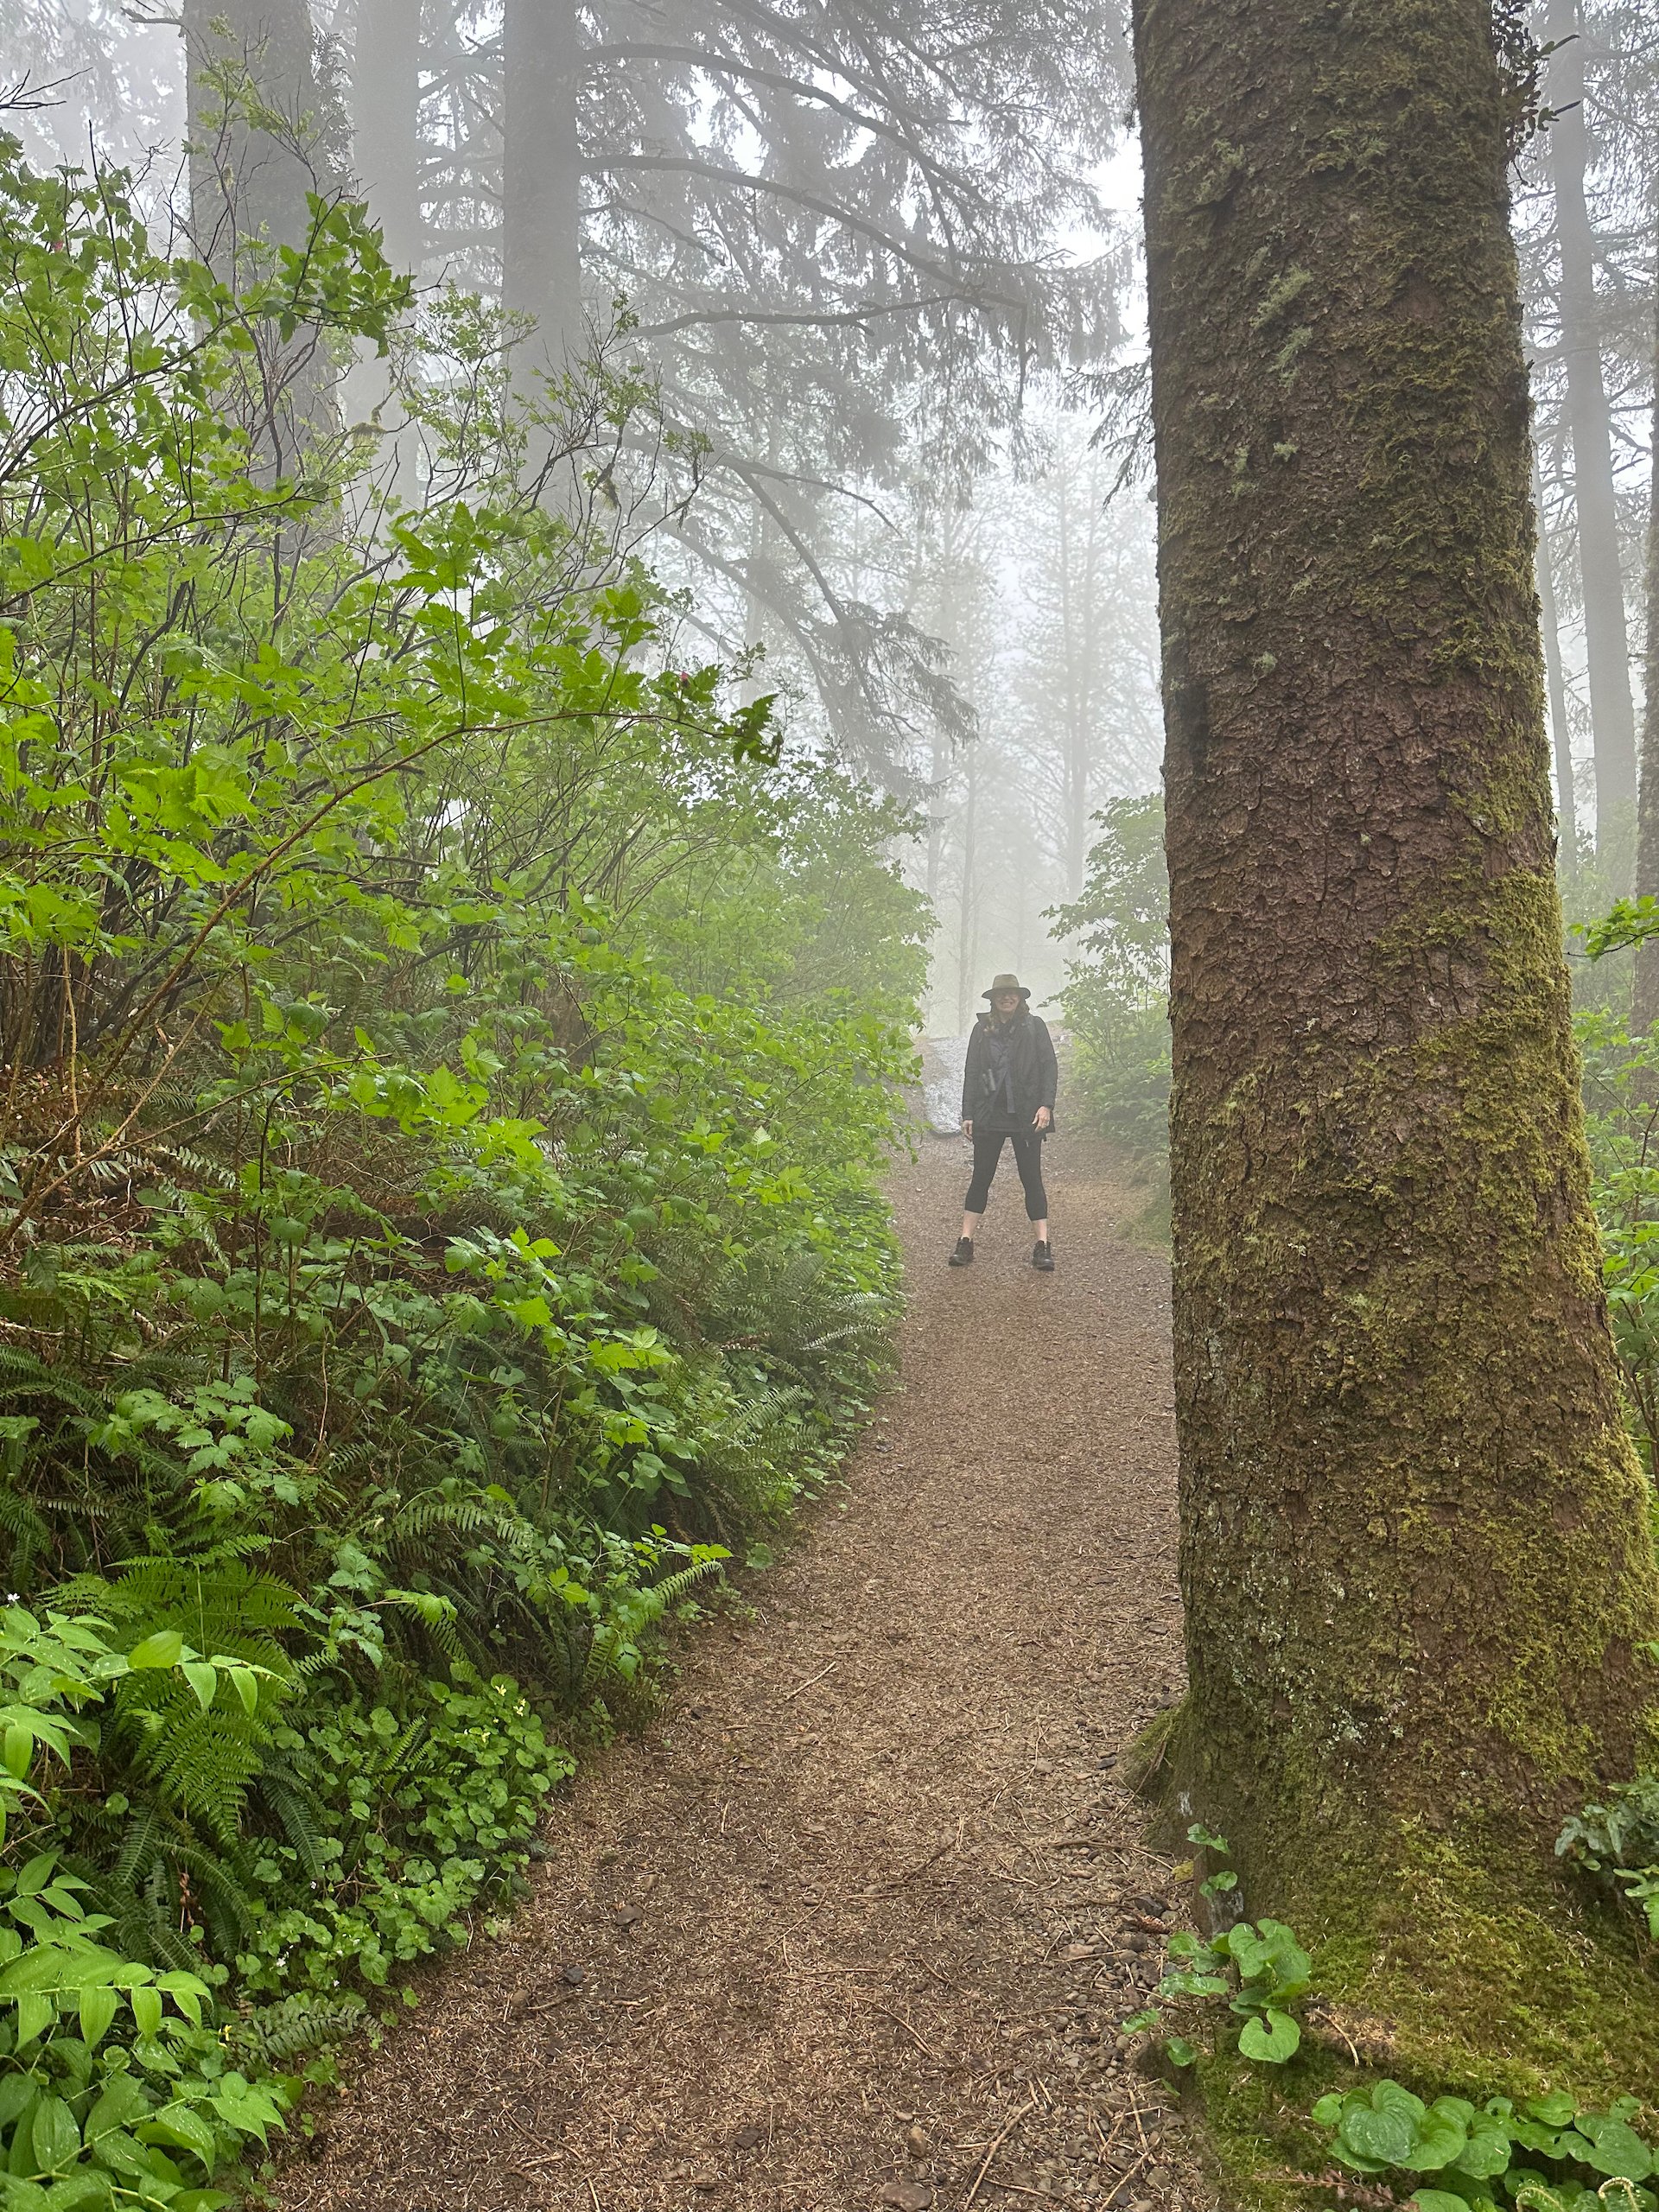  This was pretty typical of the start of the hike. You could barely see through the low hanging clouds and you quickly disappeared into the mist.  